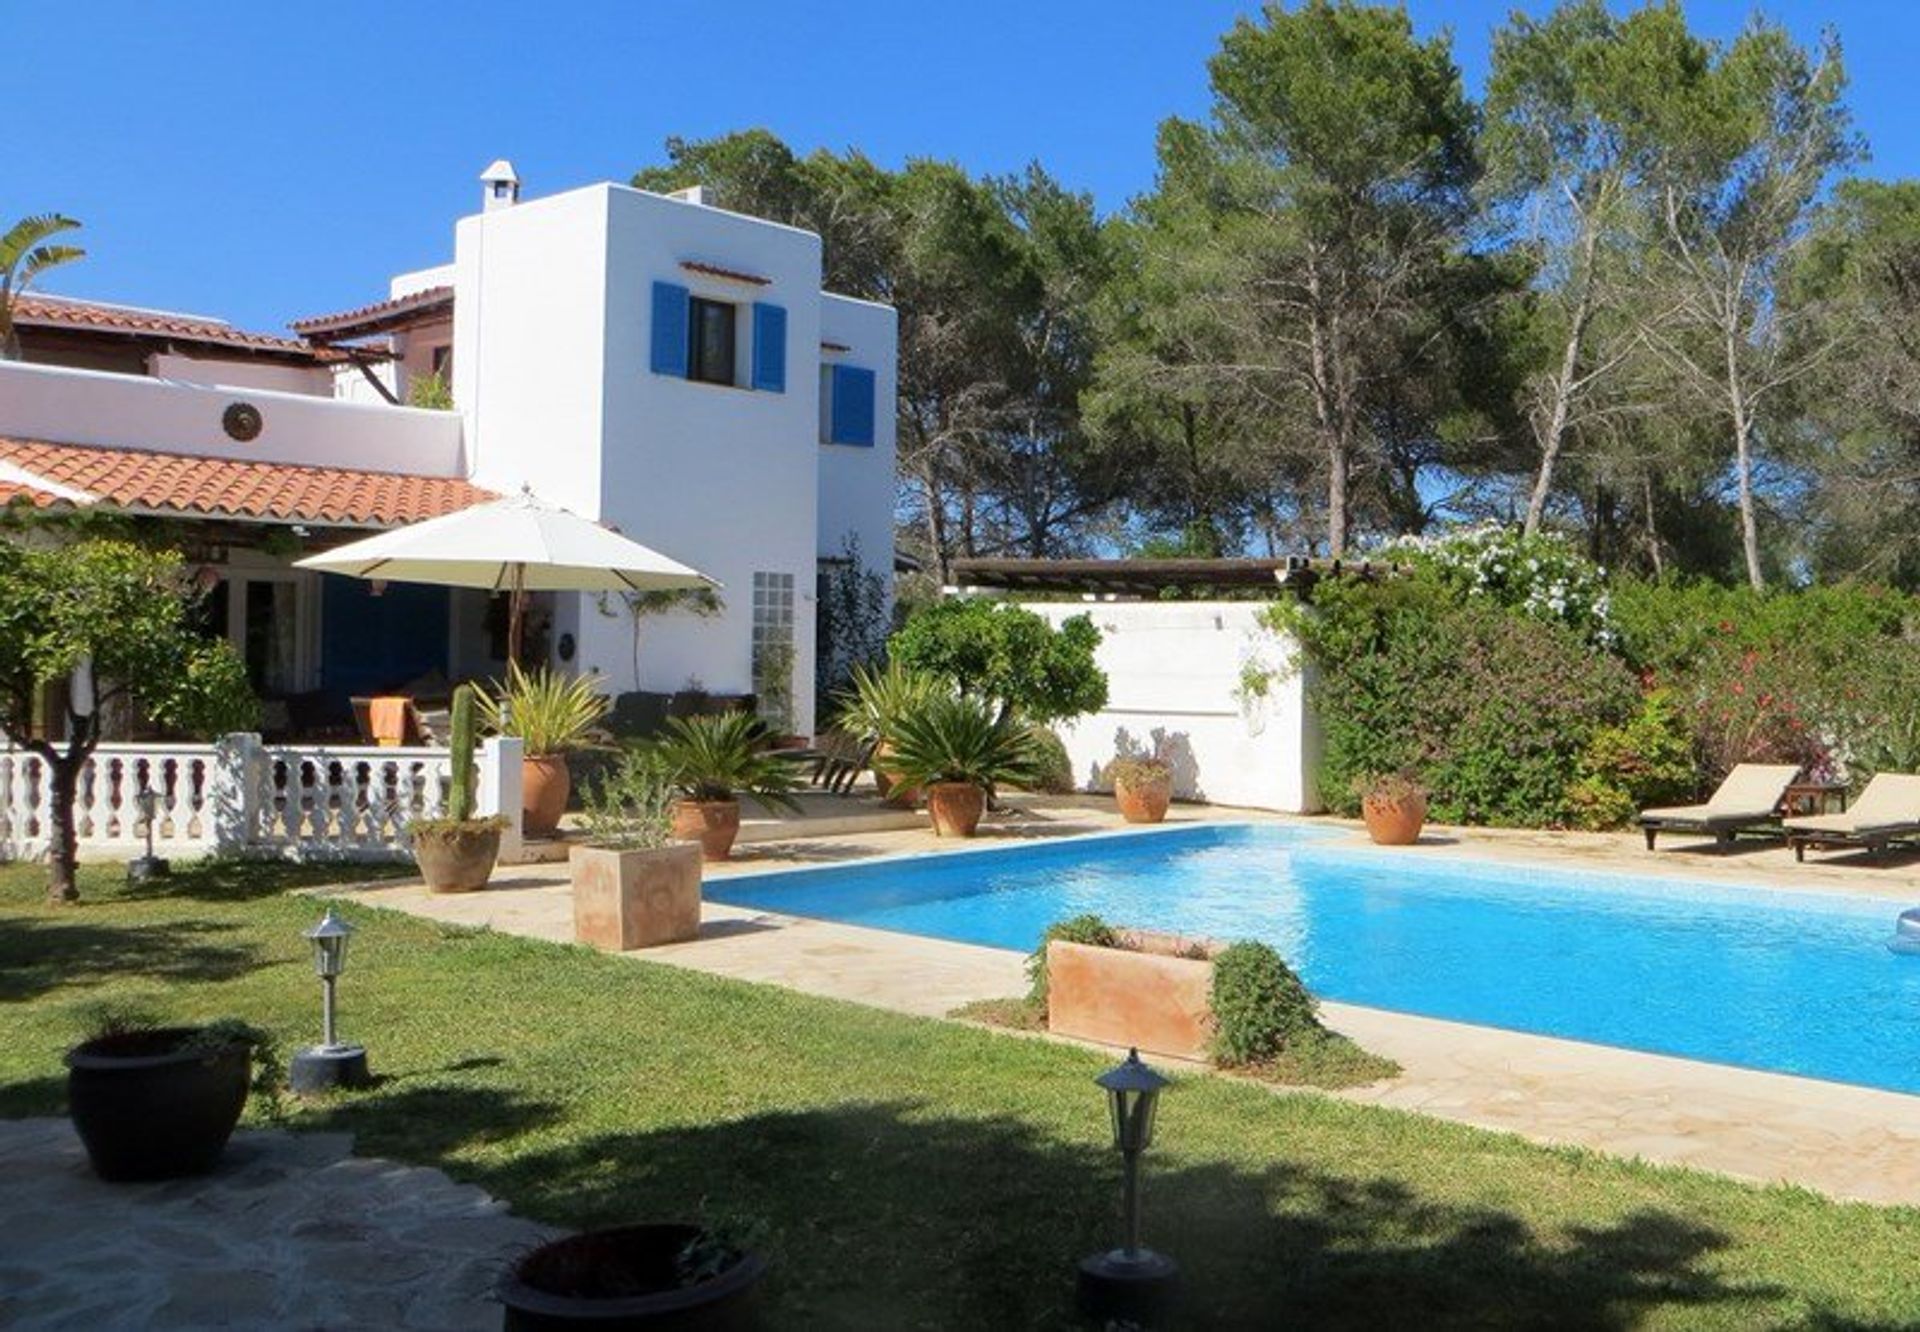 A luxury 2 bedroom beach villa with private pool in Ibiza